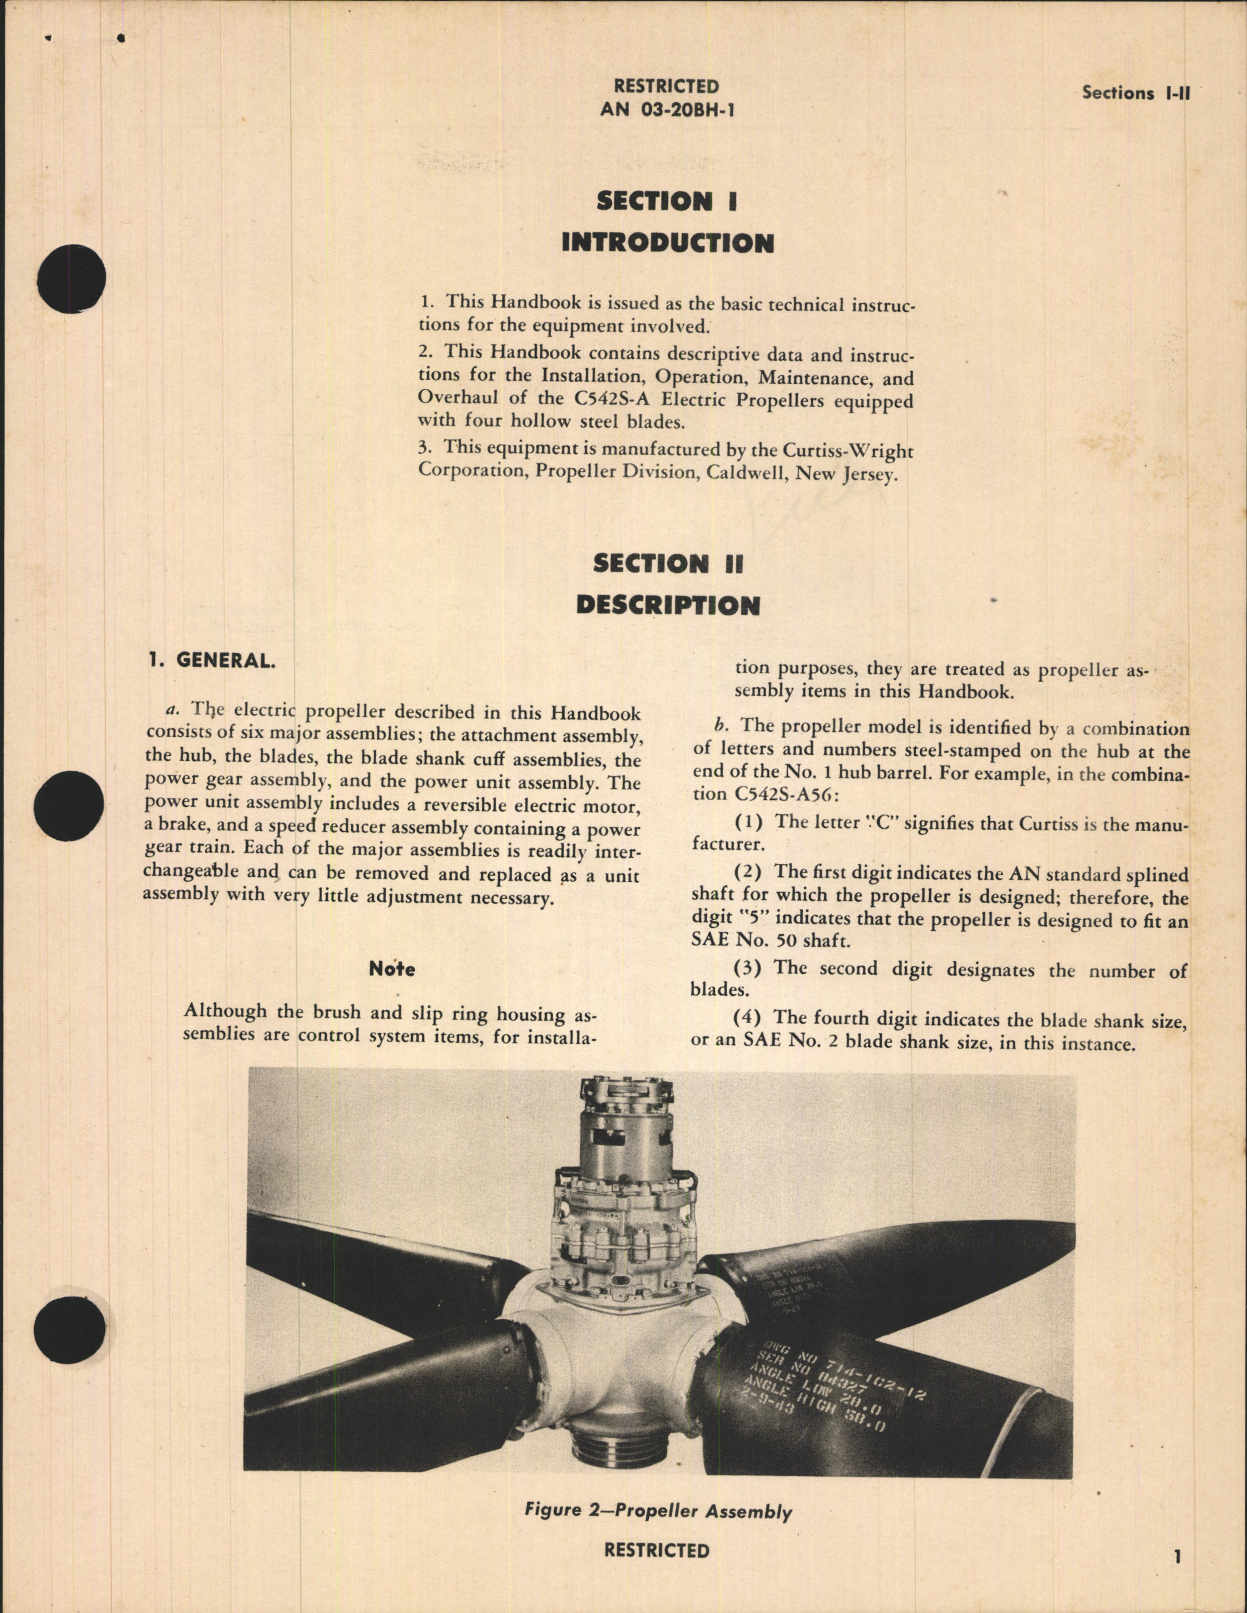 Sample page 5 from AirCorps Library document: Operation, Service, & Overhaul Instructions with Parts Catalog for Electric Propellers Model C542S-A